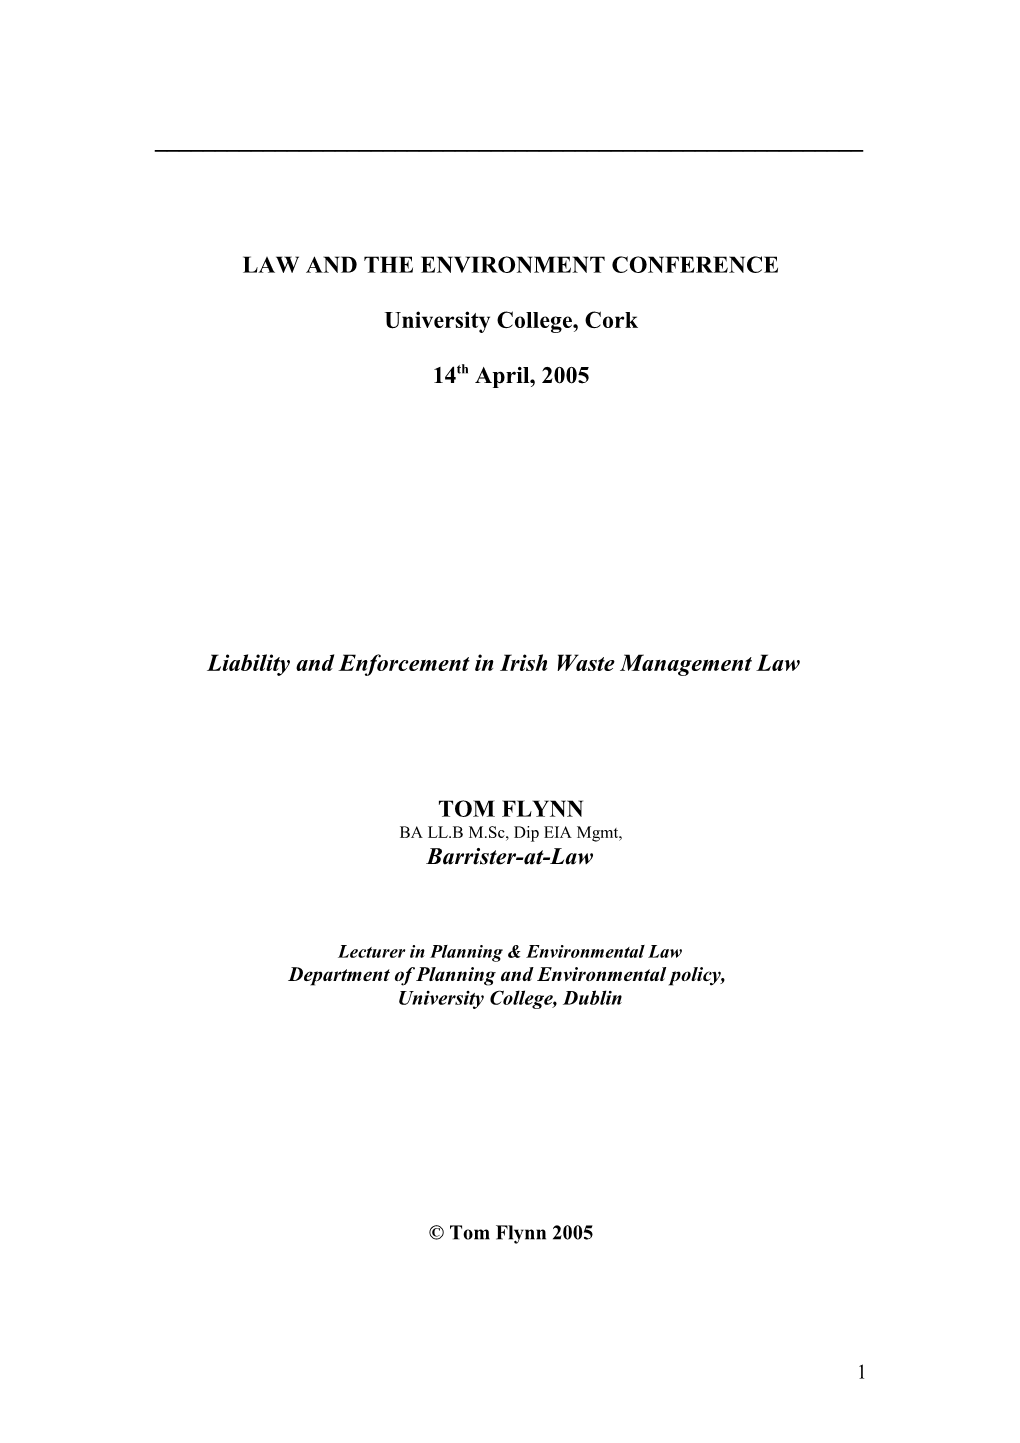 Law and the Environment Conference